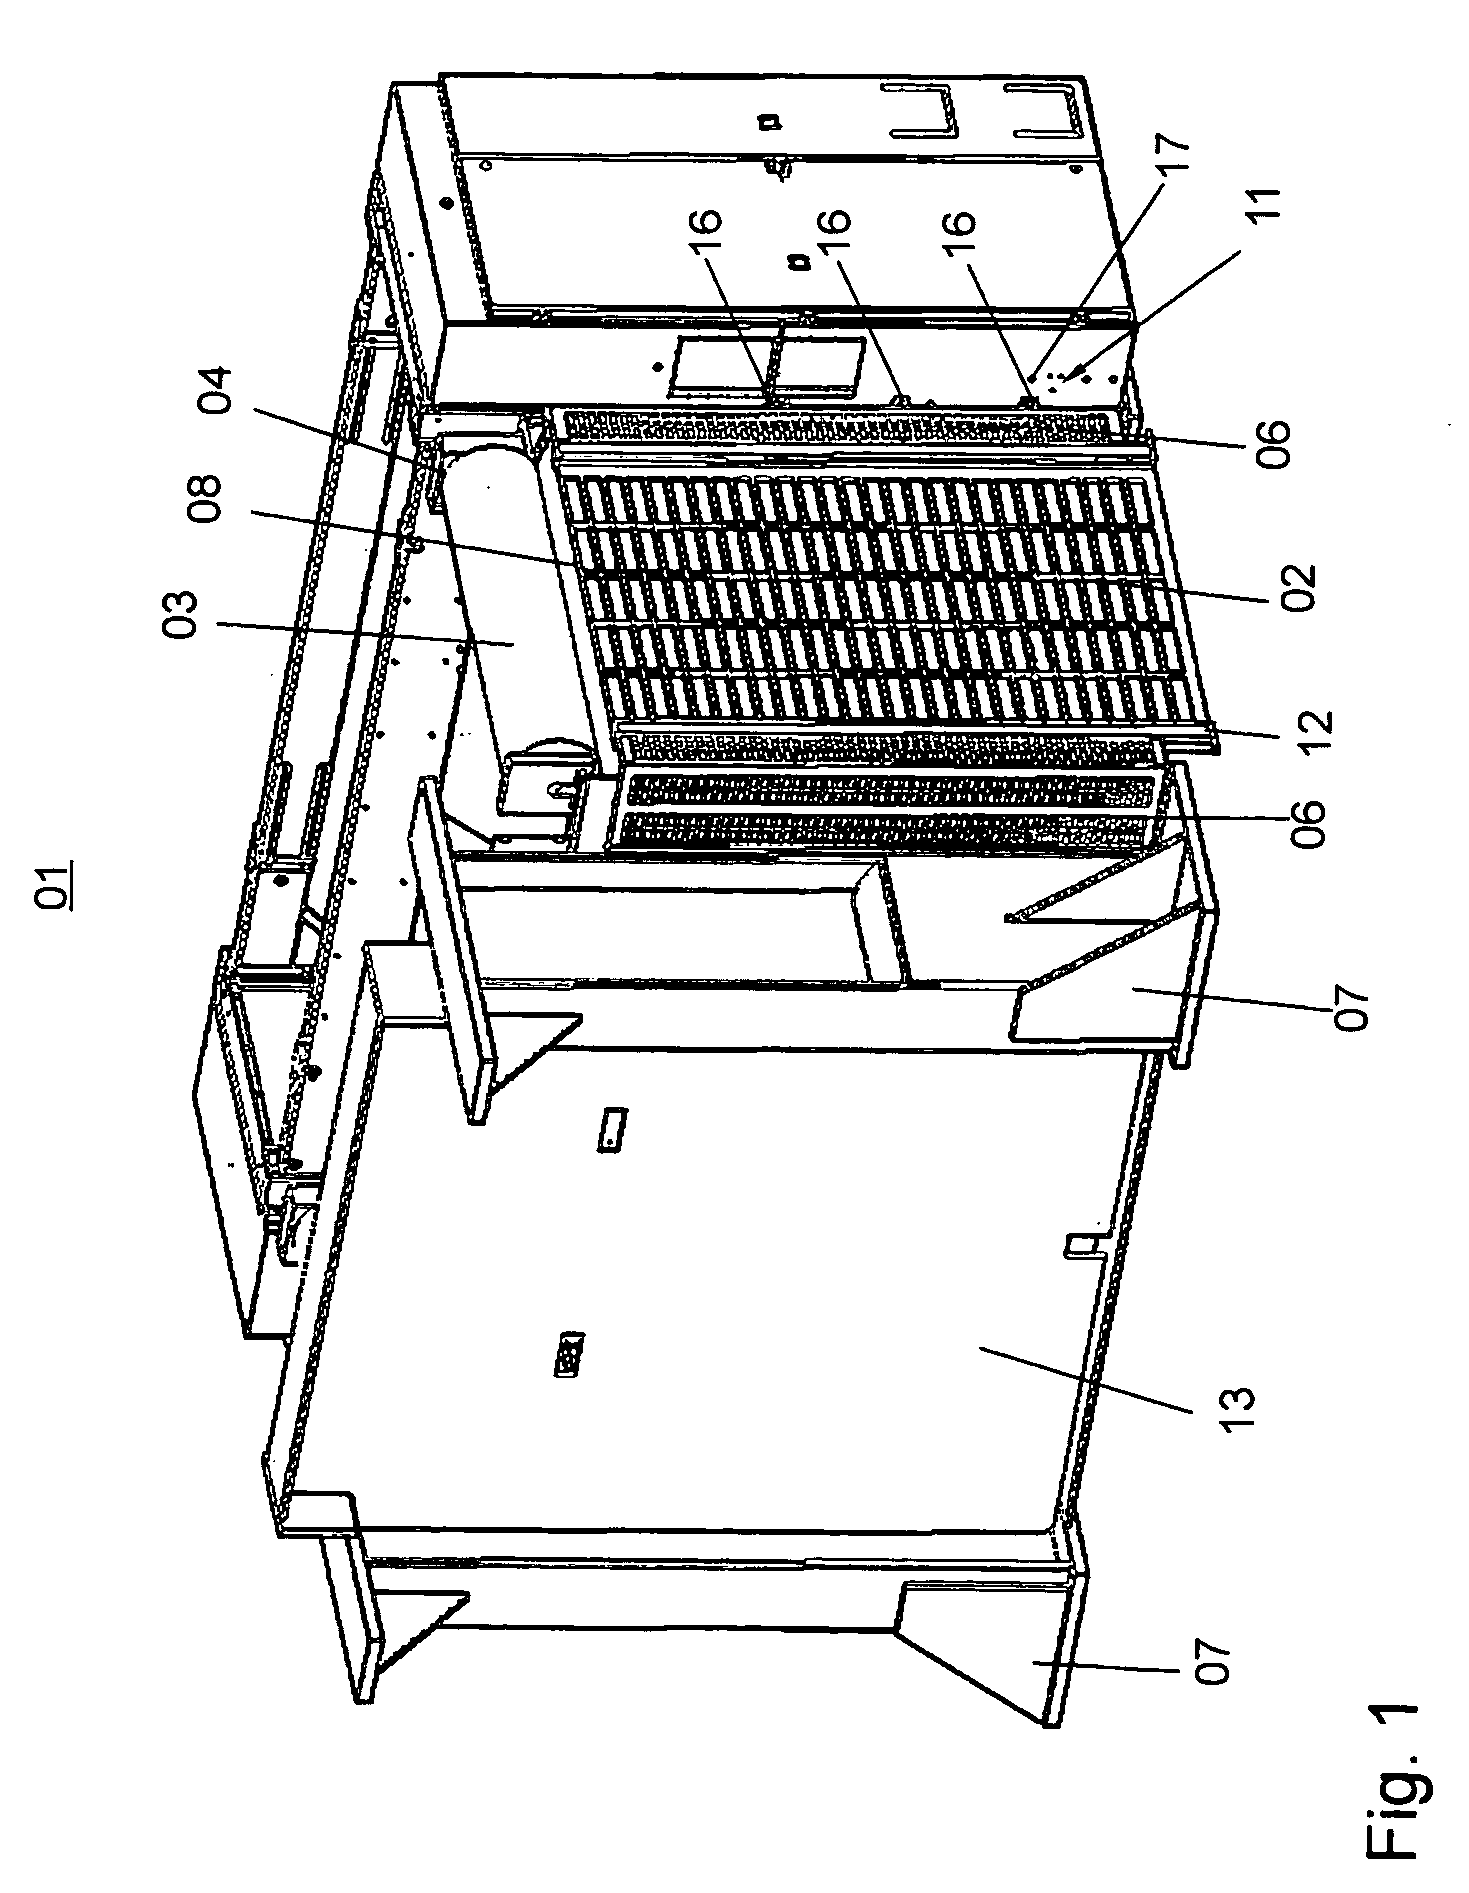 Device for covering a danger area on a roll changer and a method for controlling a device